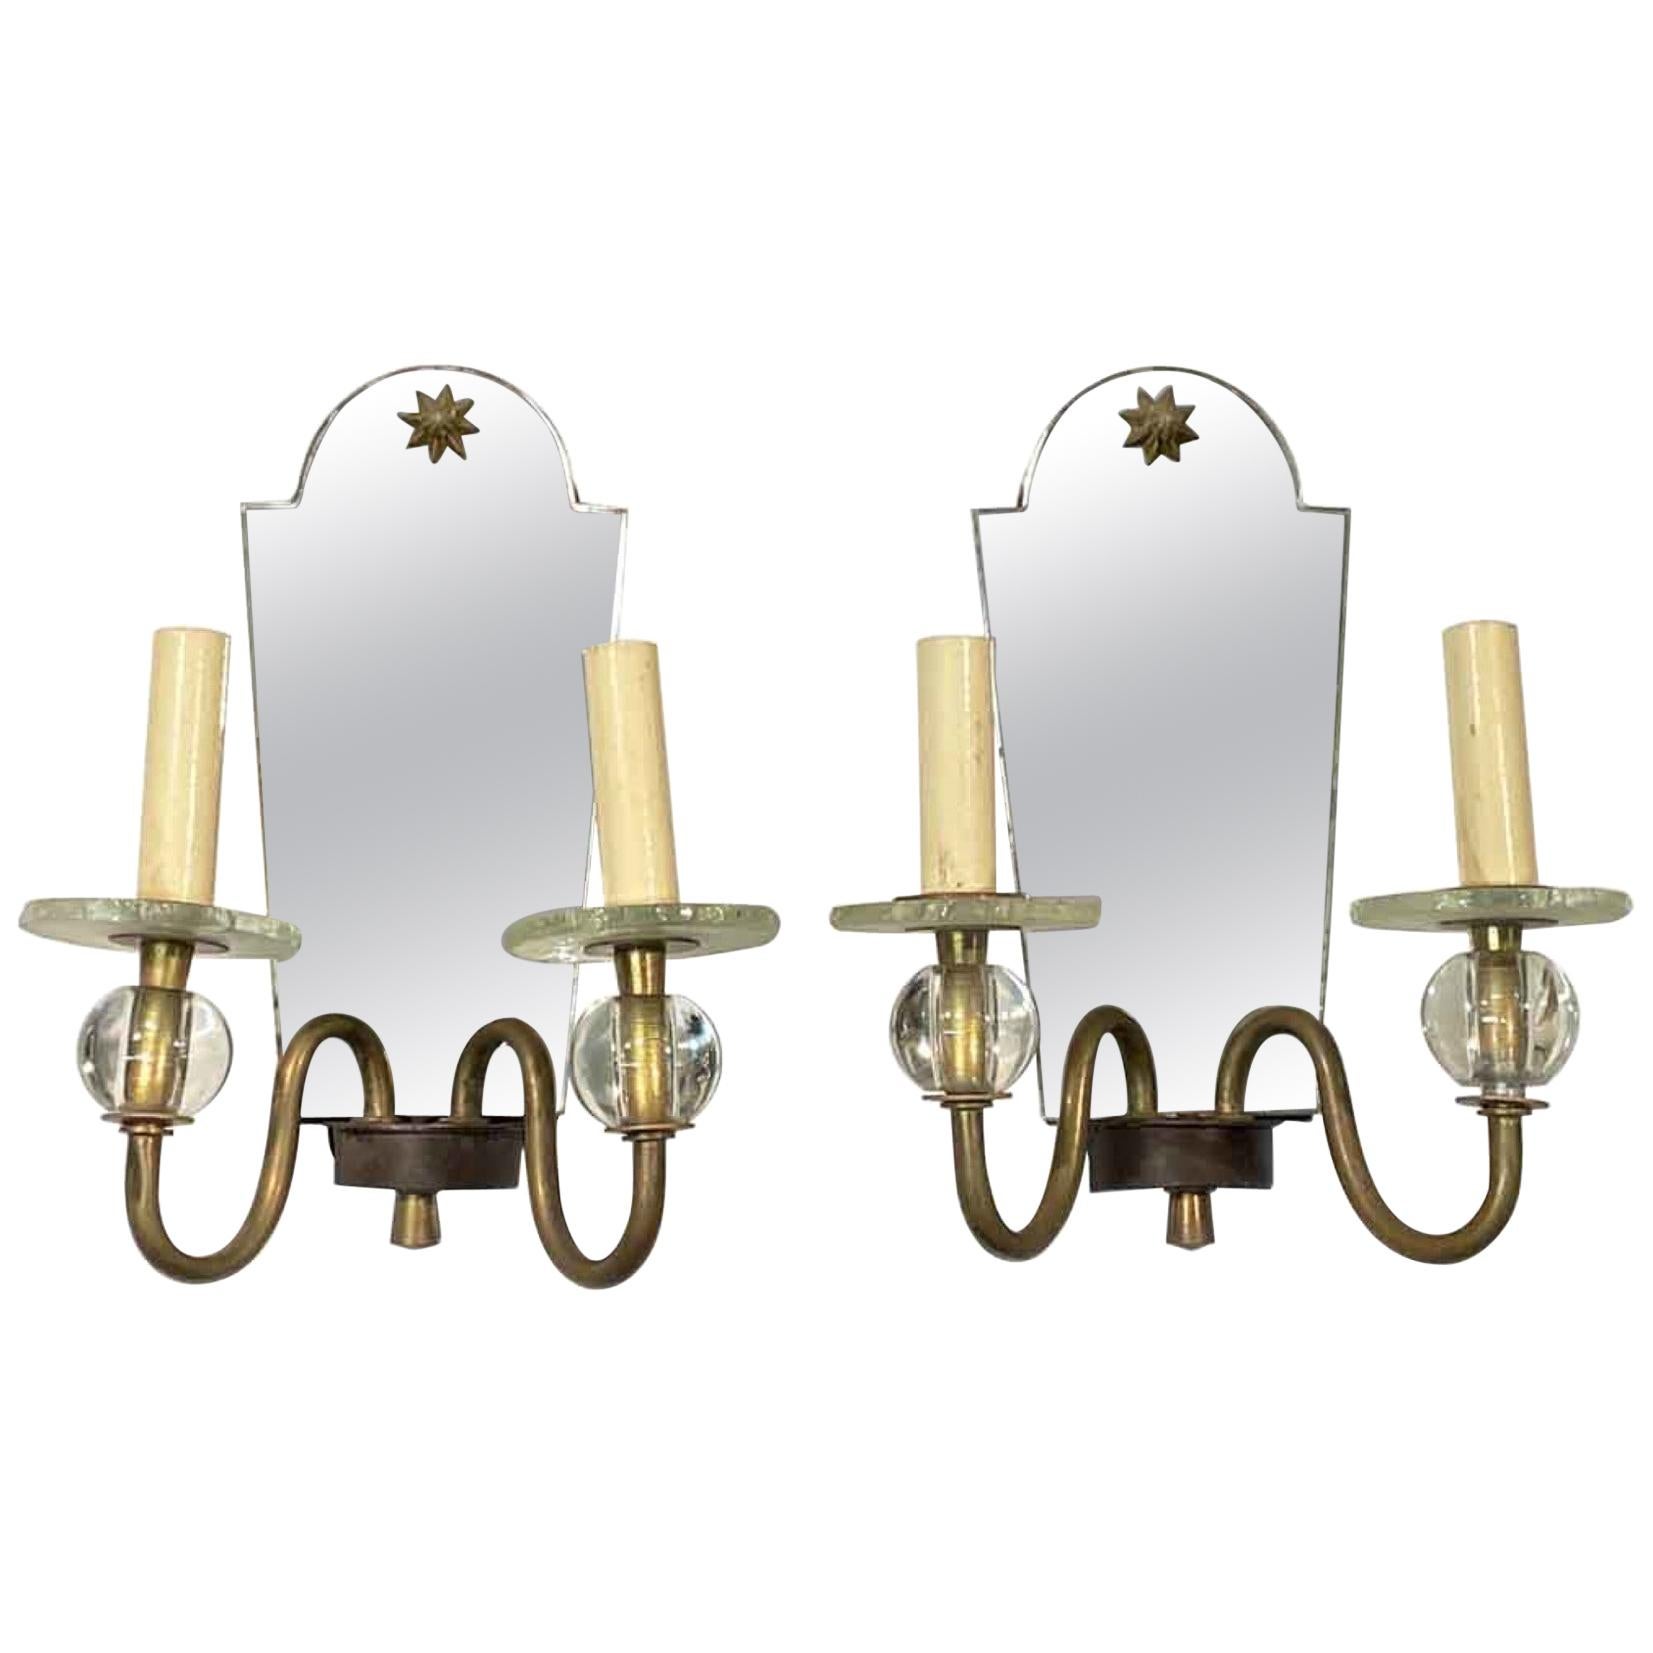 1910s Pair of French Two-Arm Star Motif Mirrored Wall Sconces